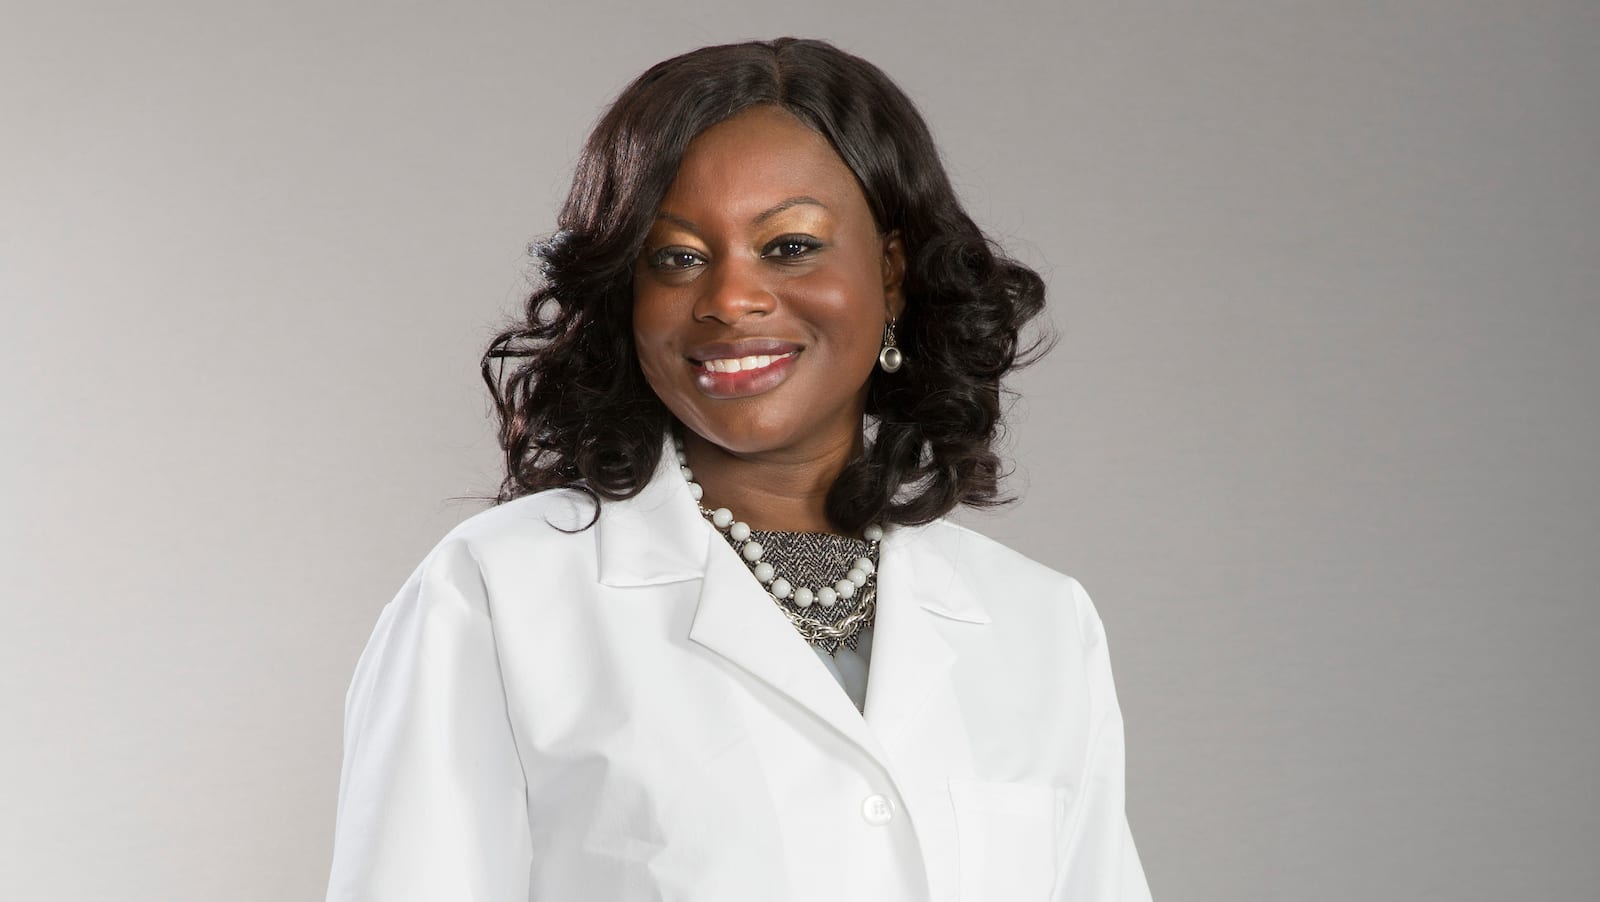 Dr. Camelia Lawrence